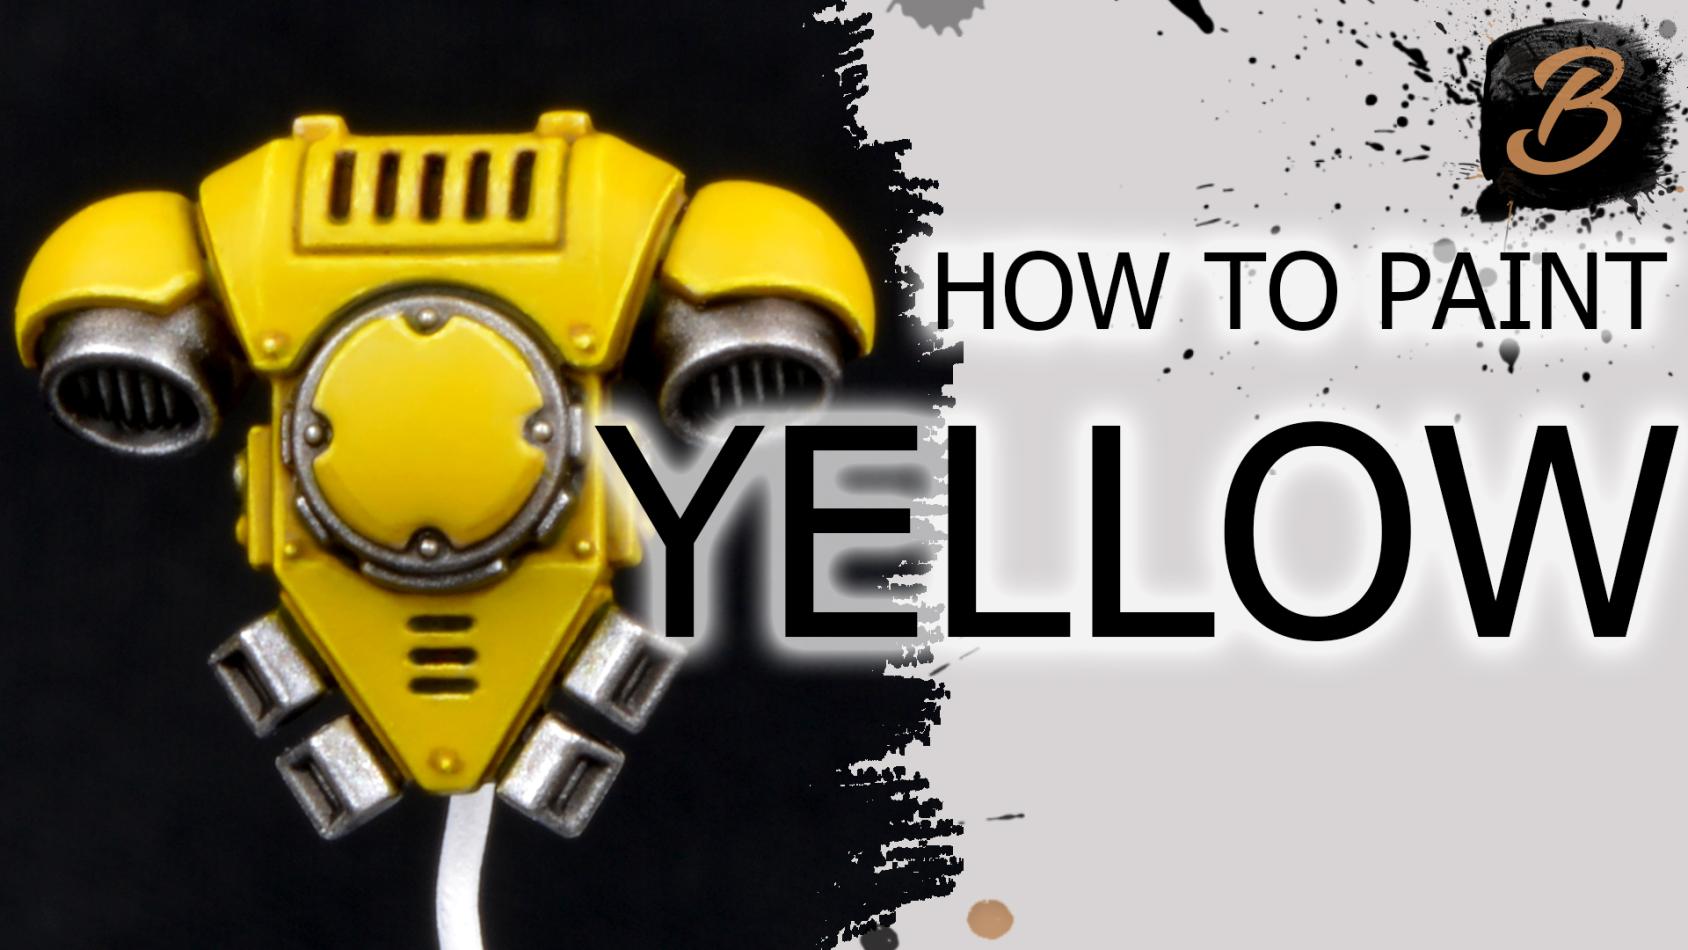 Brushstroke's How to Paint Yellow Bundle